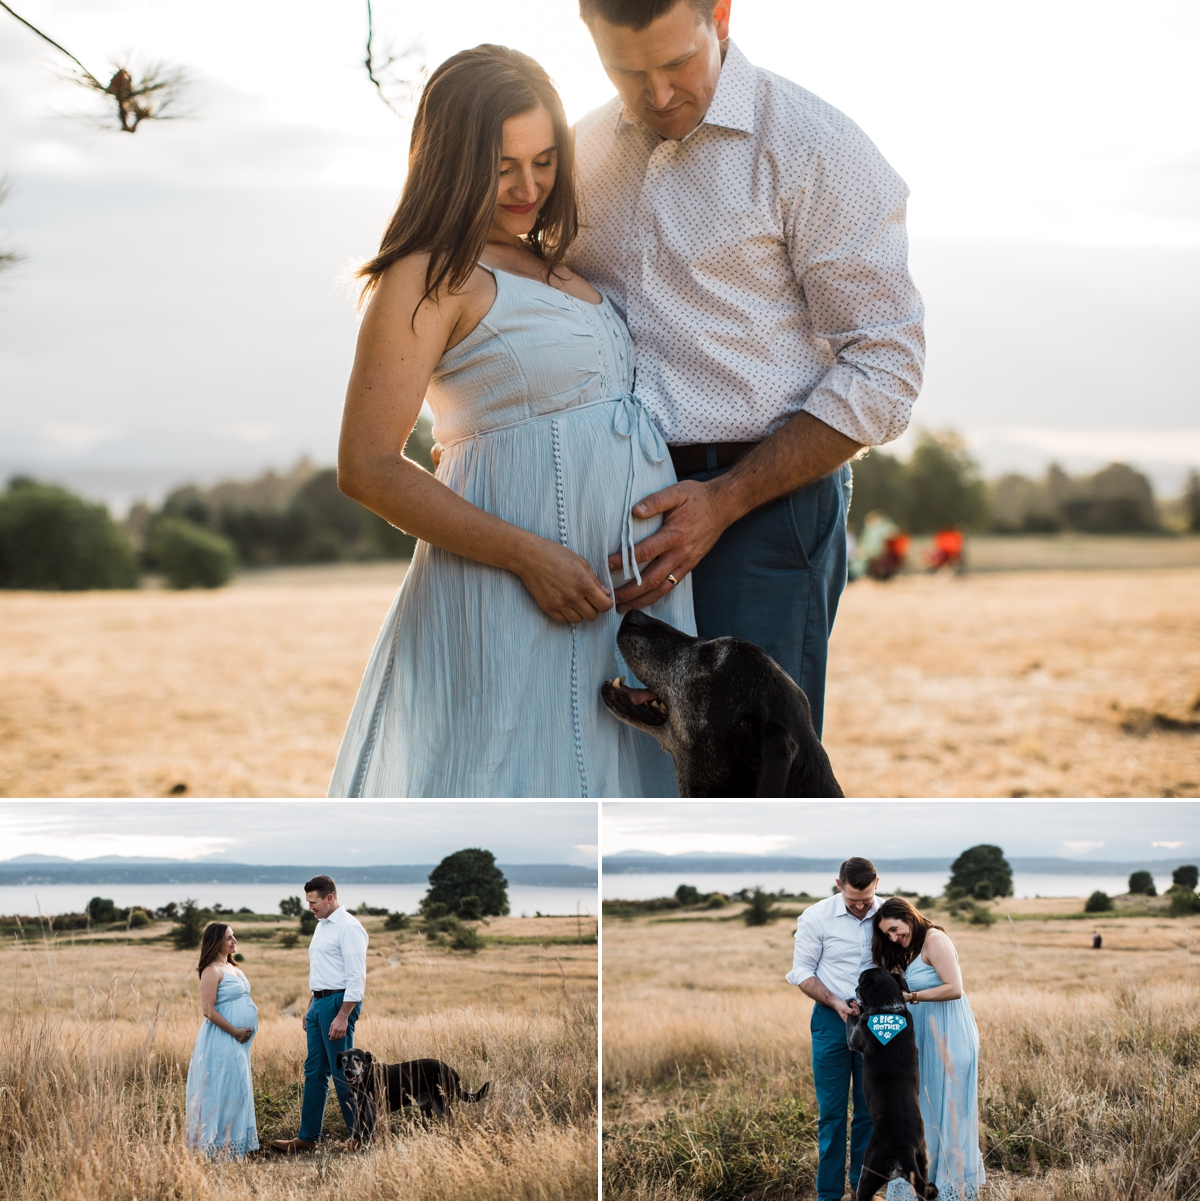 seattle maternity photographer  connected lifestyle maternity photography elena s blair 3.jpg